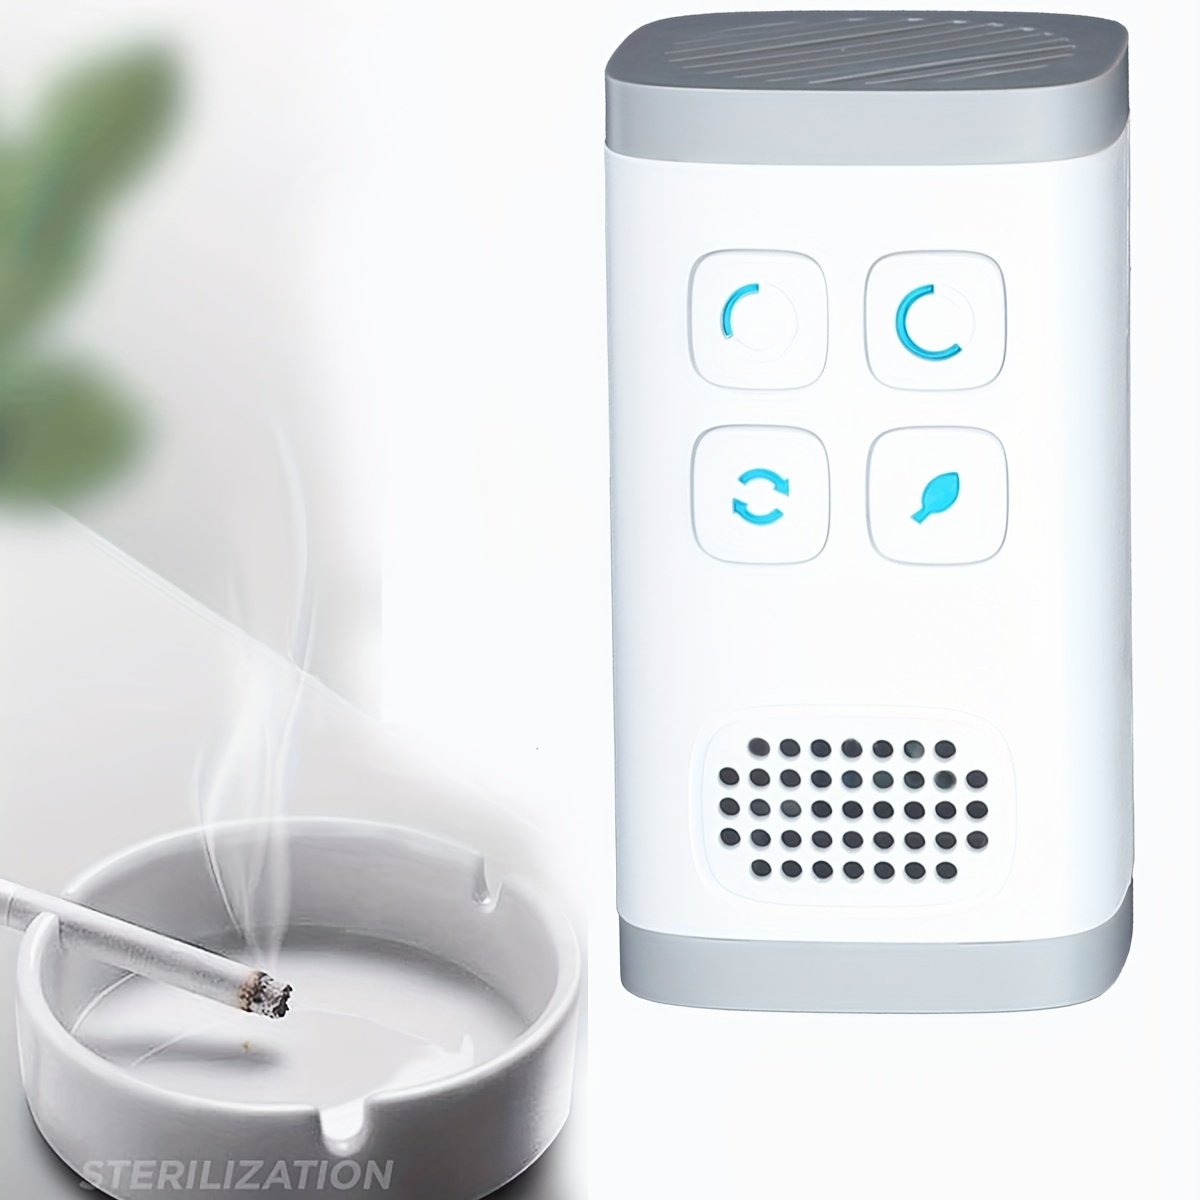 Ionizer Air Purifiers: What Is It and How Does It Work? - Molekule